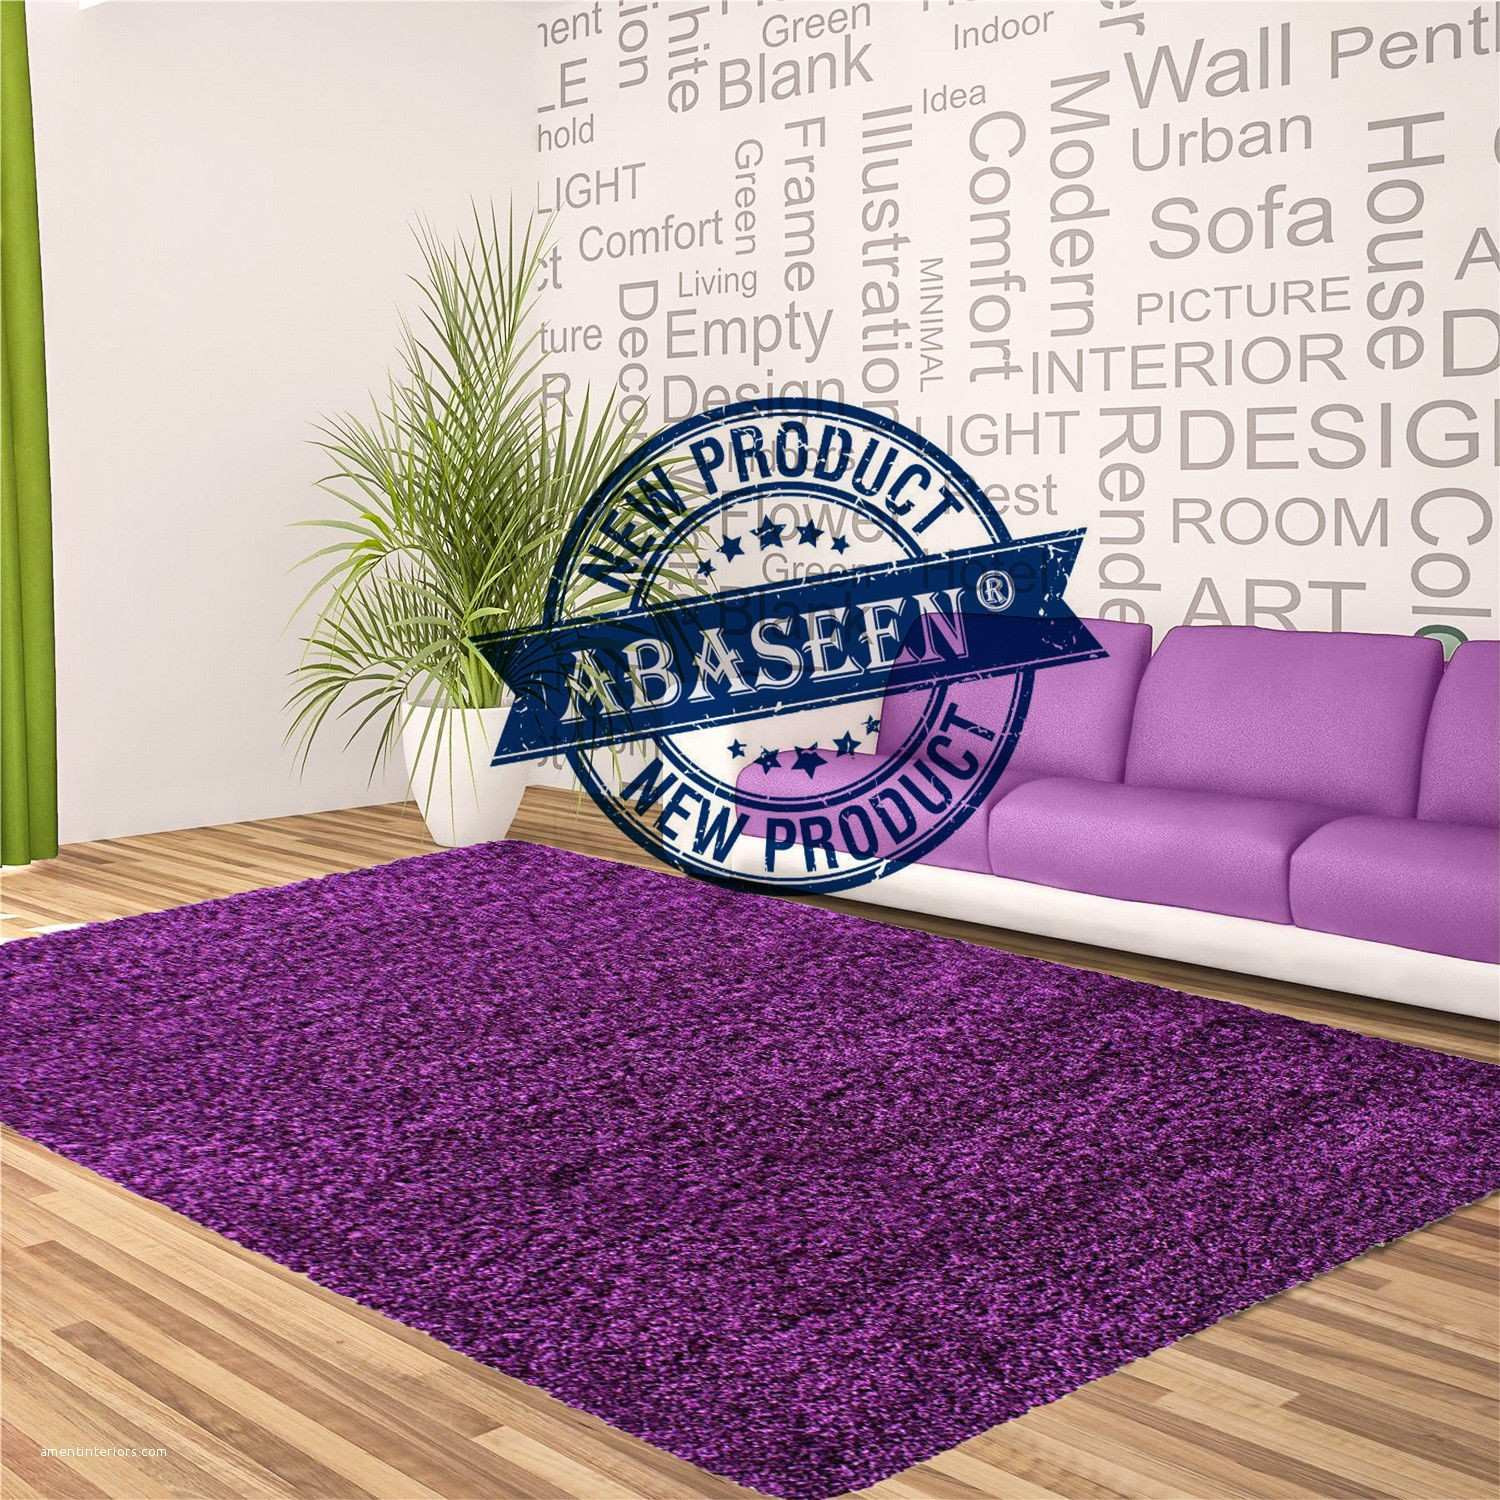 26 Perfect Living Room Rug On Hardwood Floor 2024 free download living room rug on hardwood floor of awesome large living room rugs of dining room with leather and woven in attractive large living room rugs styling up your aubergine purple floor rugs thi